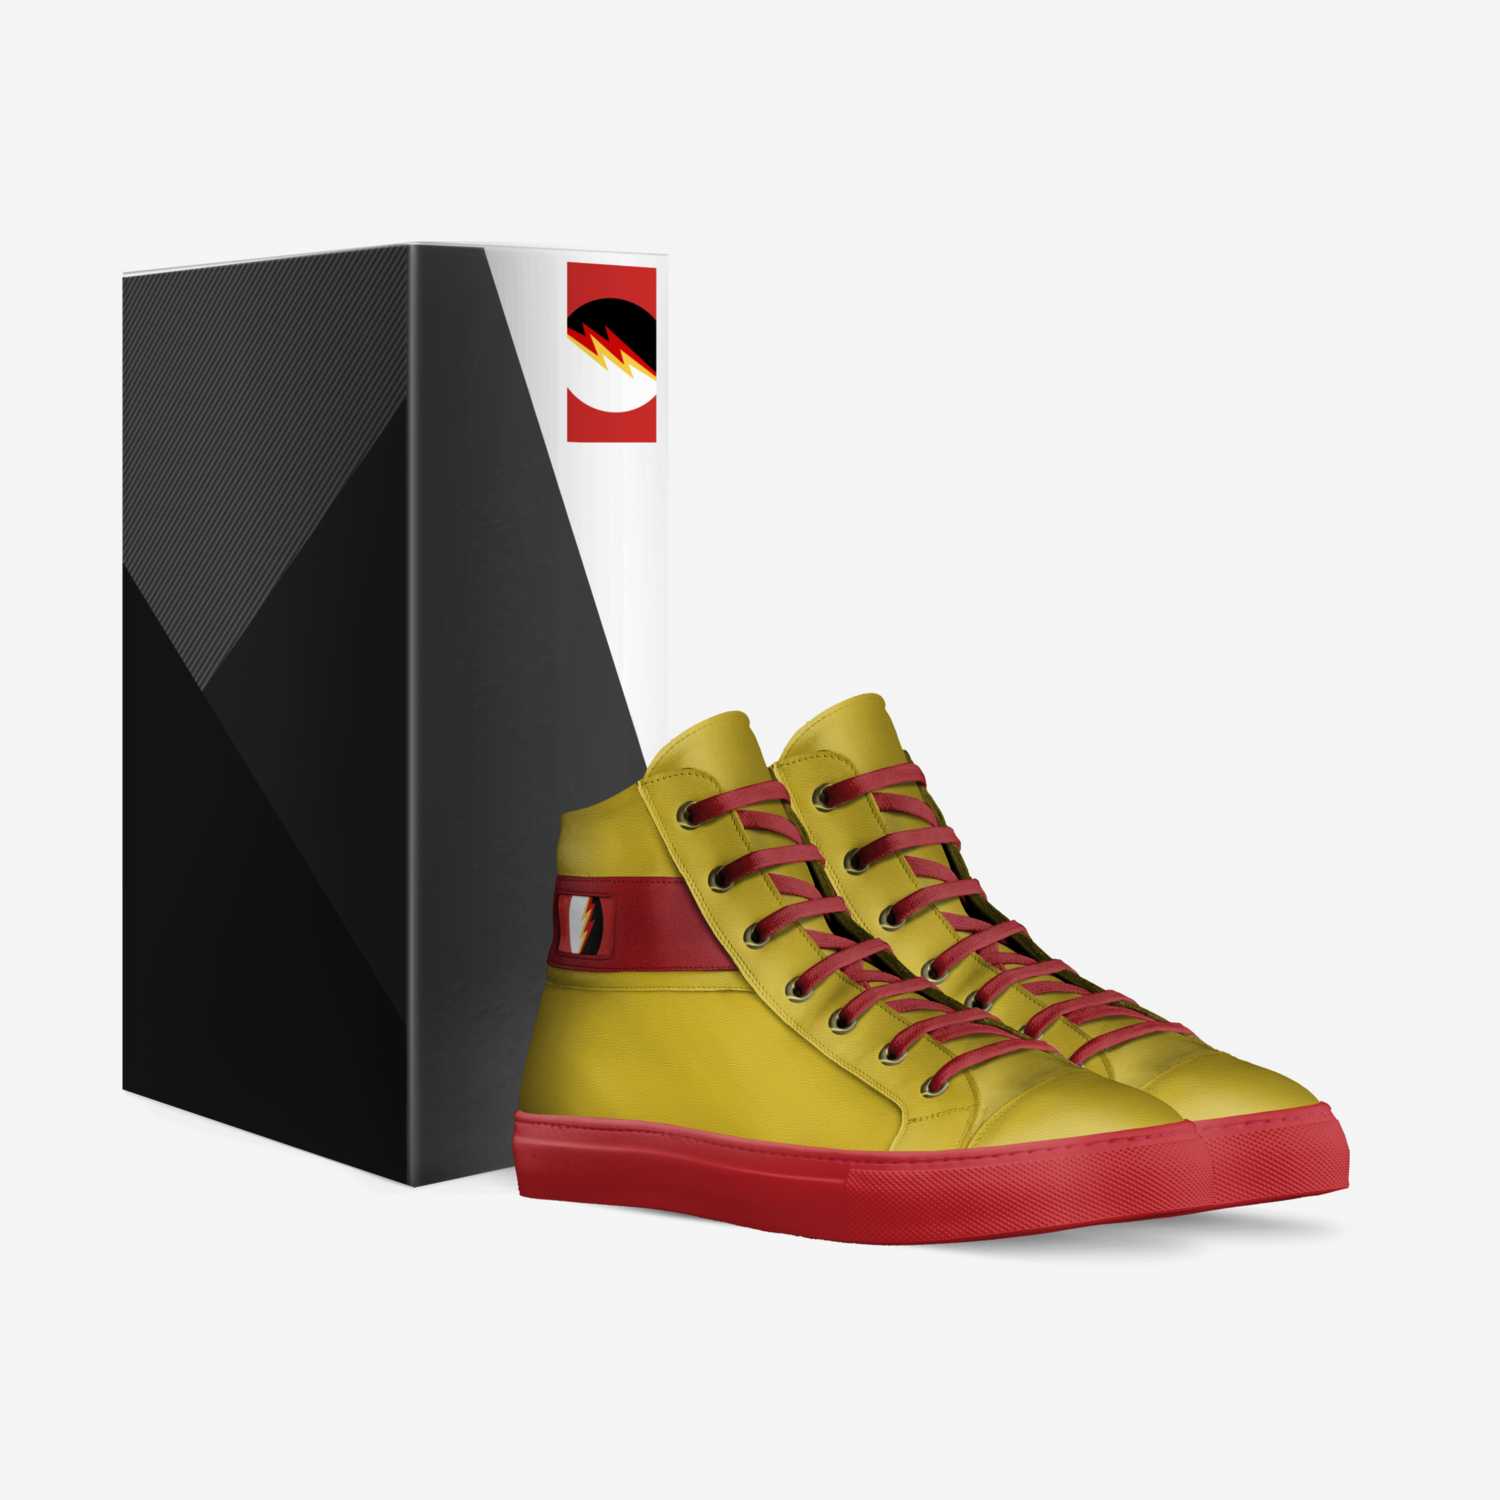 Thawne custom made in Italy shoes by Devin T | Box view